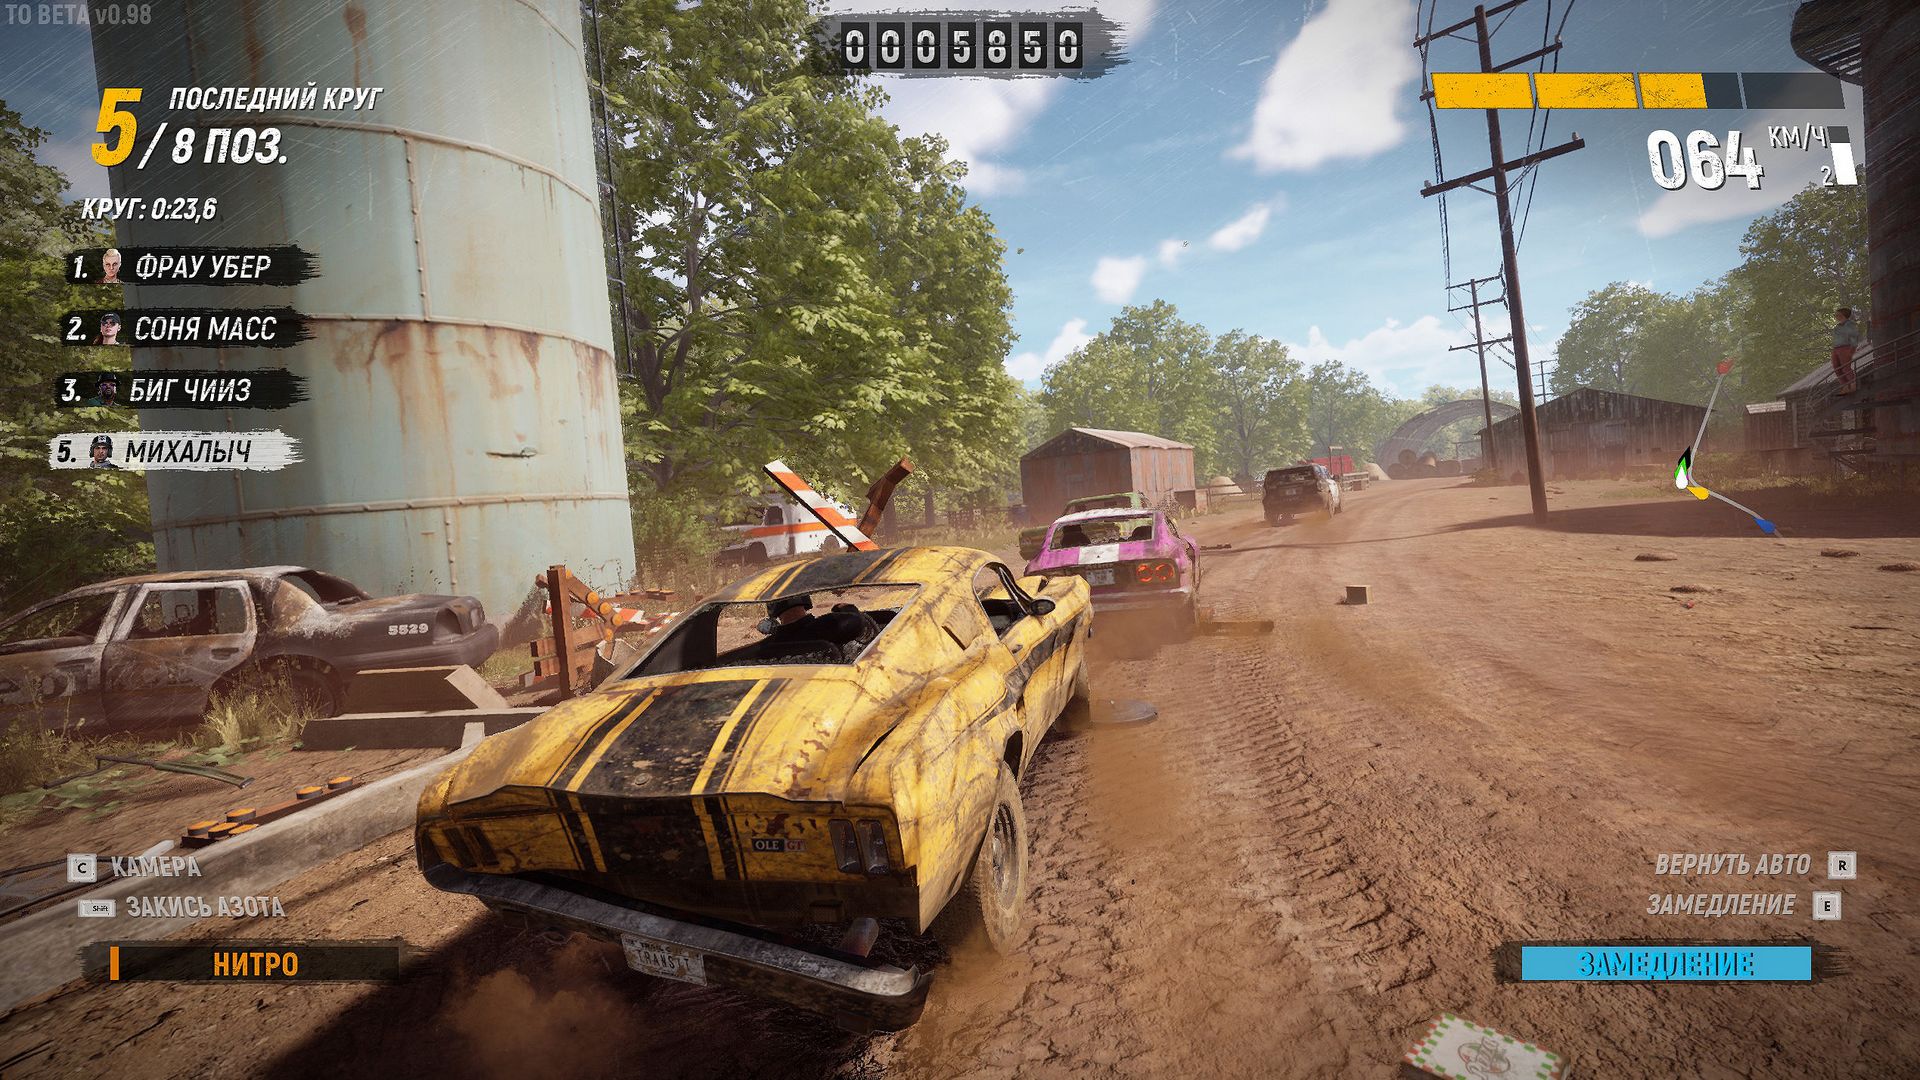 Trail Out: The racing game inspired by FlatOut and Burnout reveals its gameplay with video!  |  Xbox One